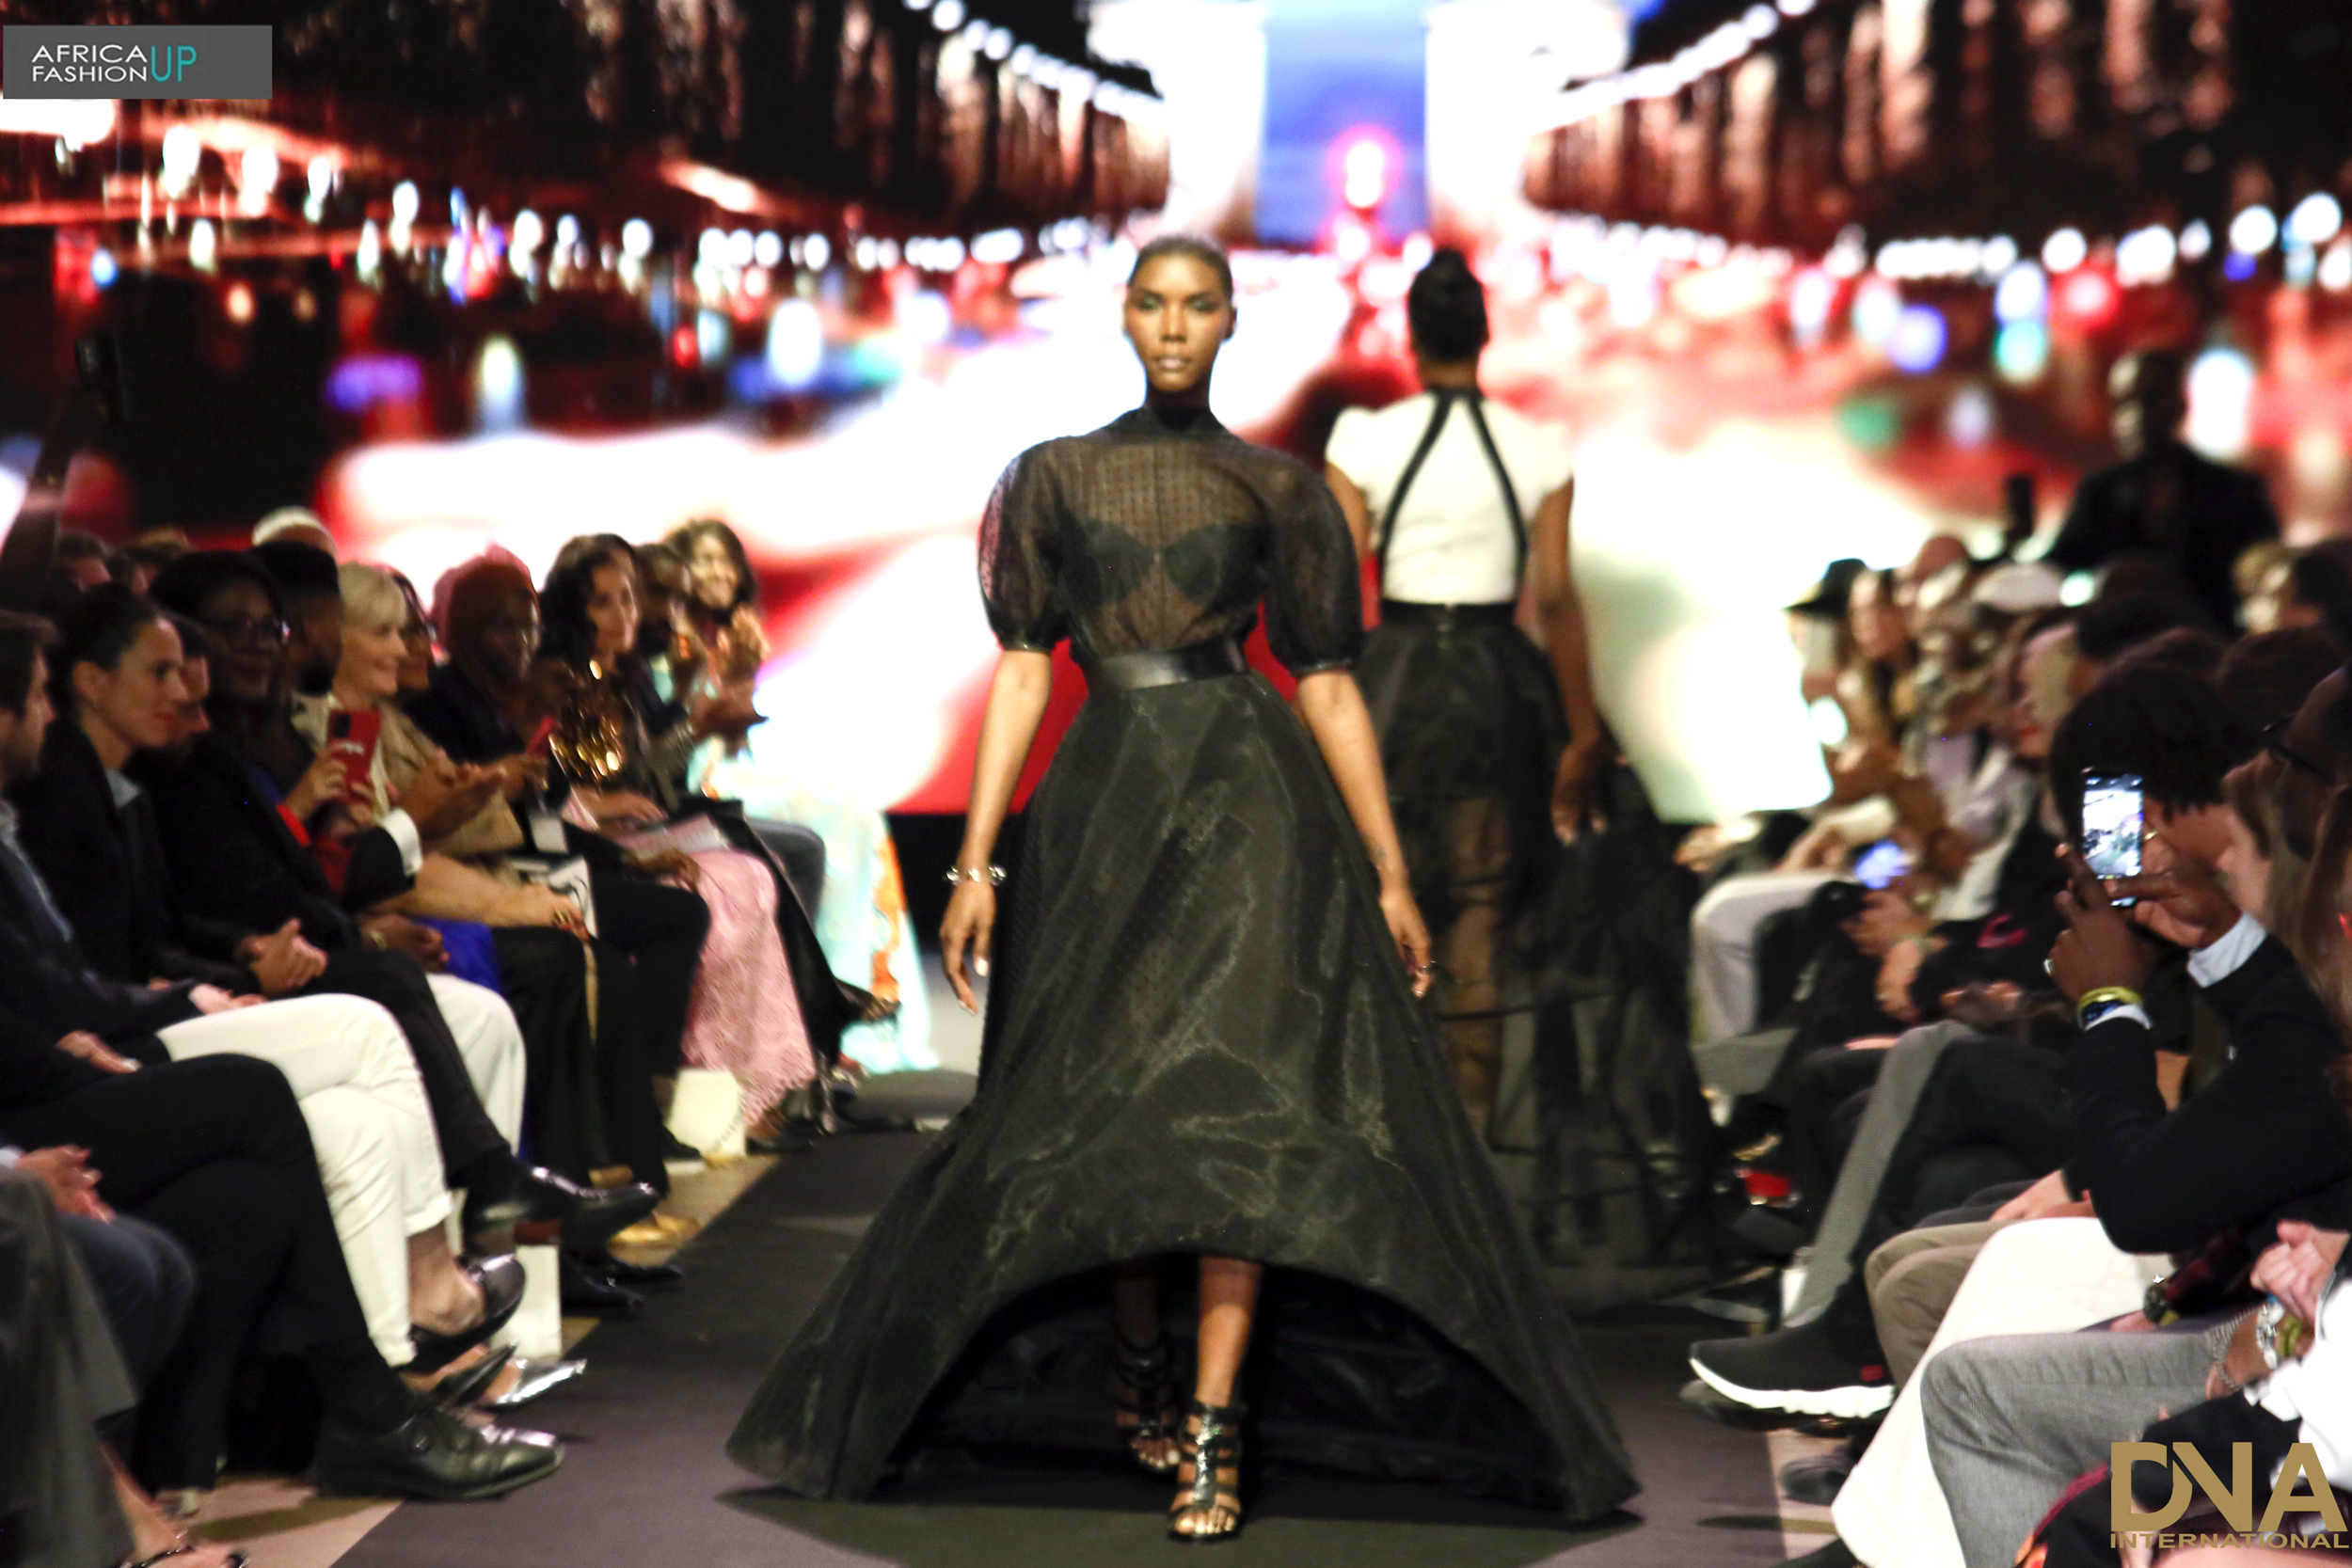 AFRICA-FASHION-UP-EDITION-2-CLARISSE-HIERAIX-COUTURE-PARIS-DN-AFRICA-DNA-INTERNATIONAL-MEDIA-PARTNER--MD0A1925